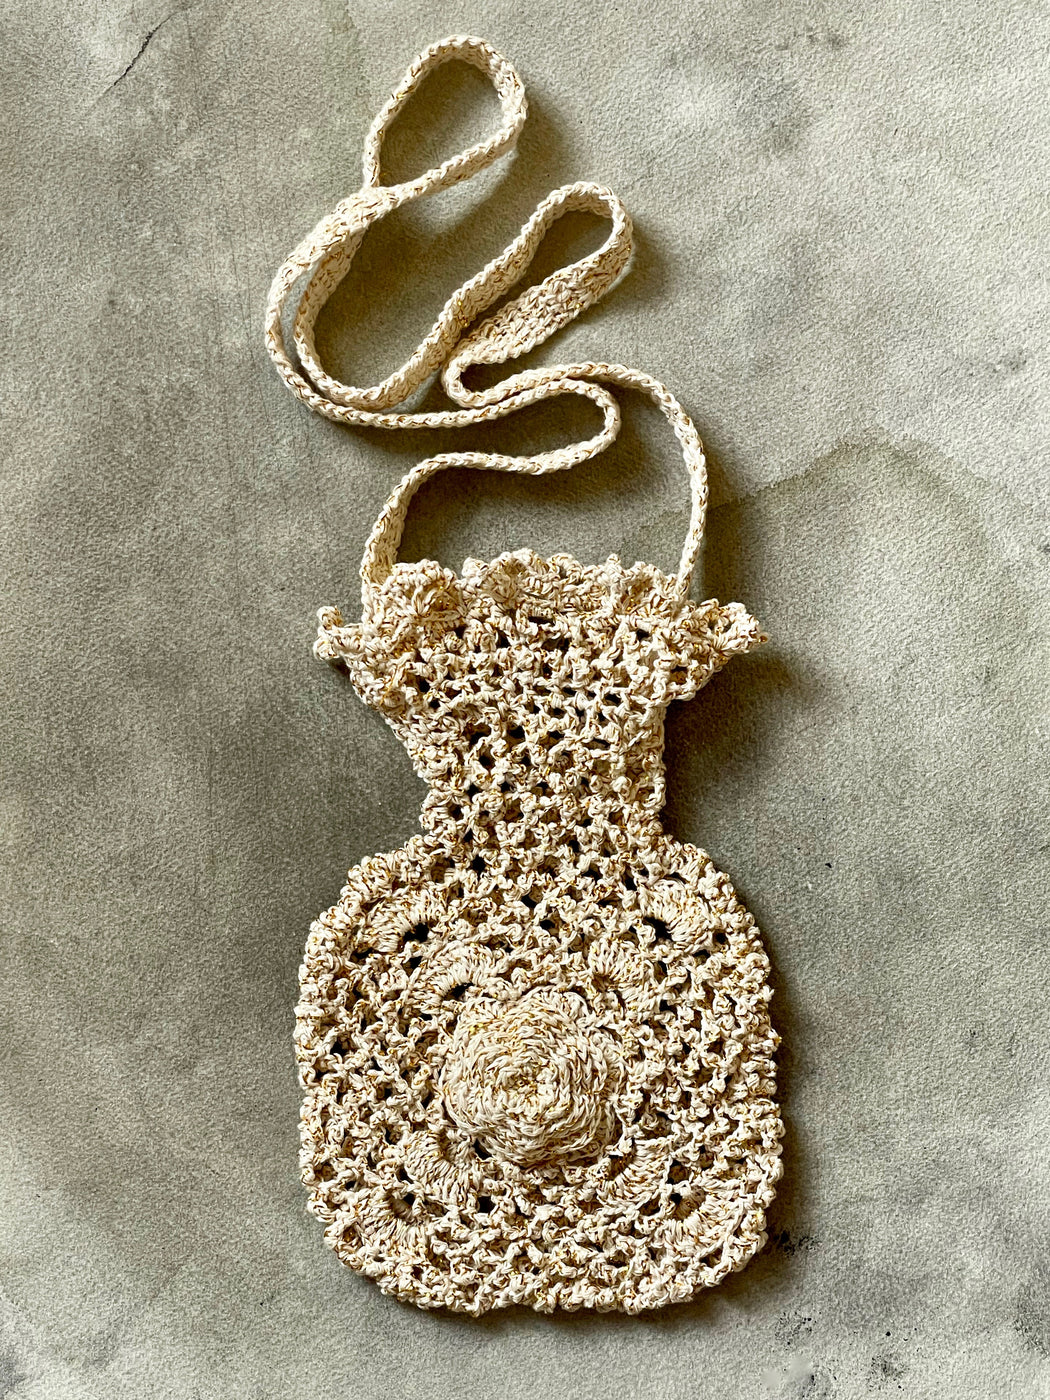 Nathalie Lete Hand-Crocheted Flower Purse - Ivory & Gold